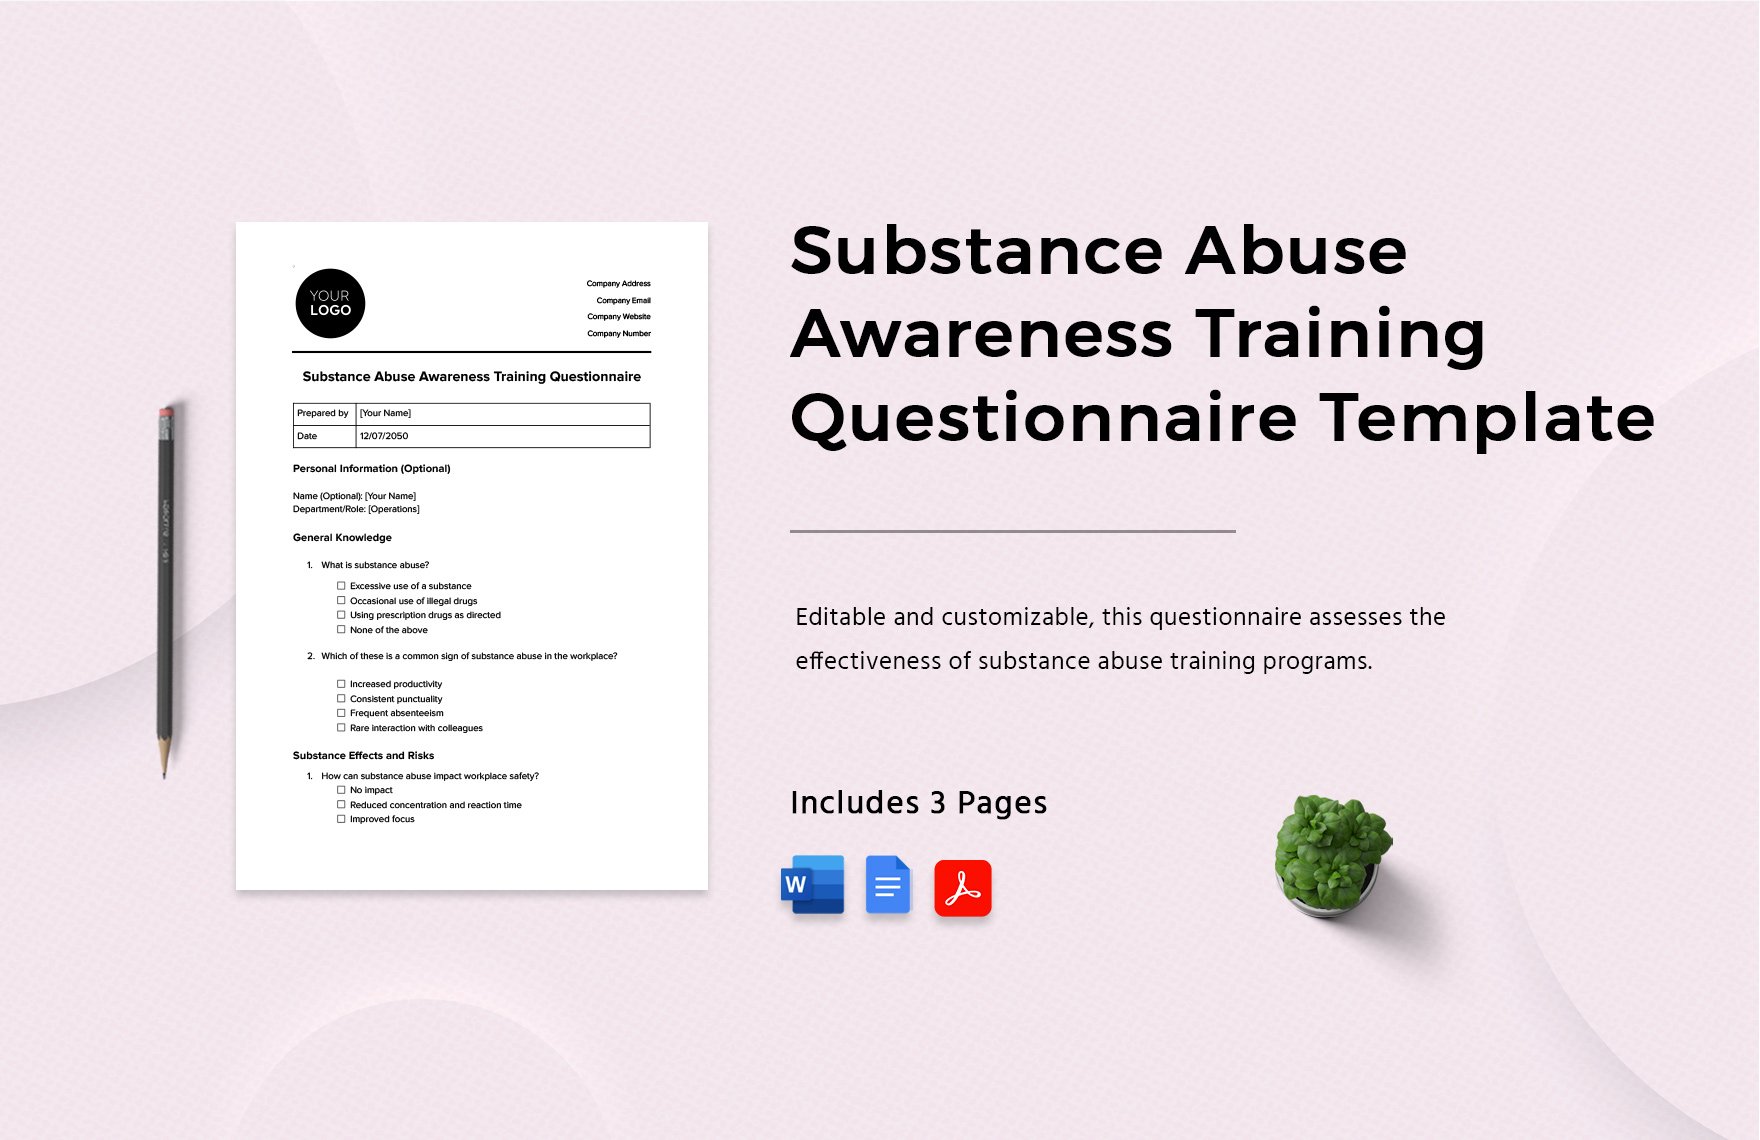 Substance Abuse Awareness Training Questionnaire Template in Word, Google Docs, PDF